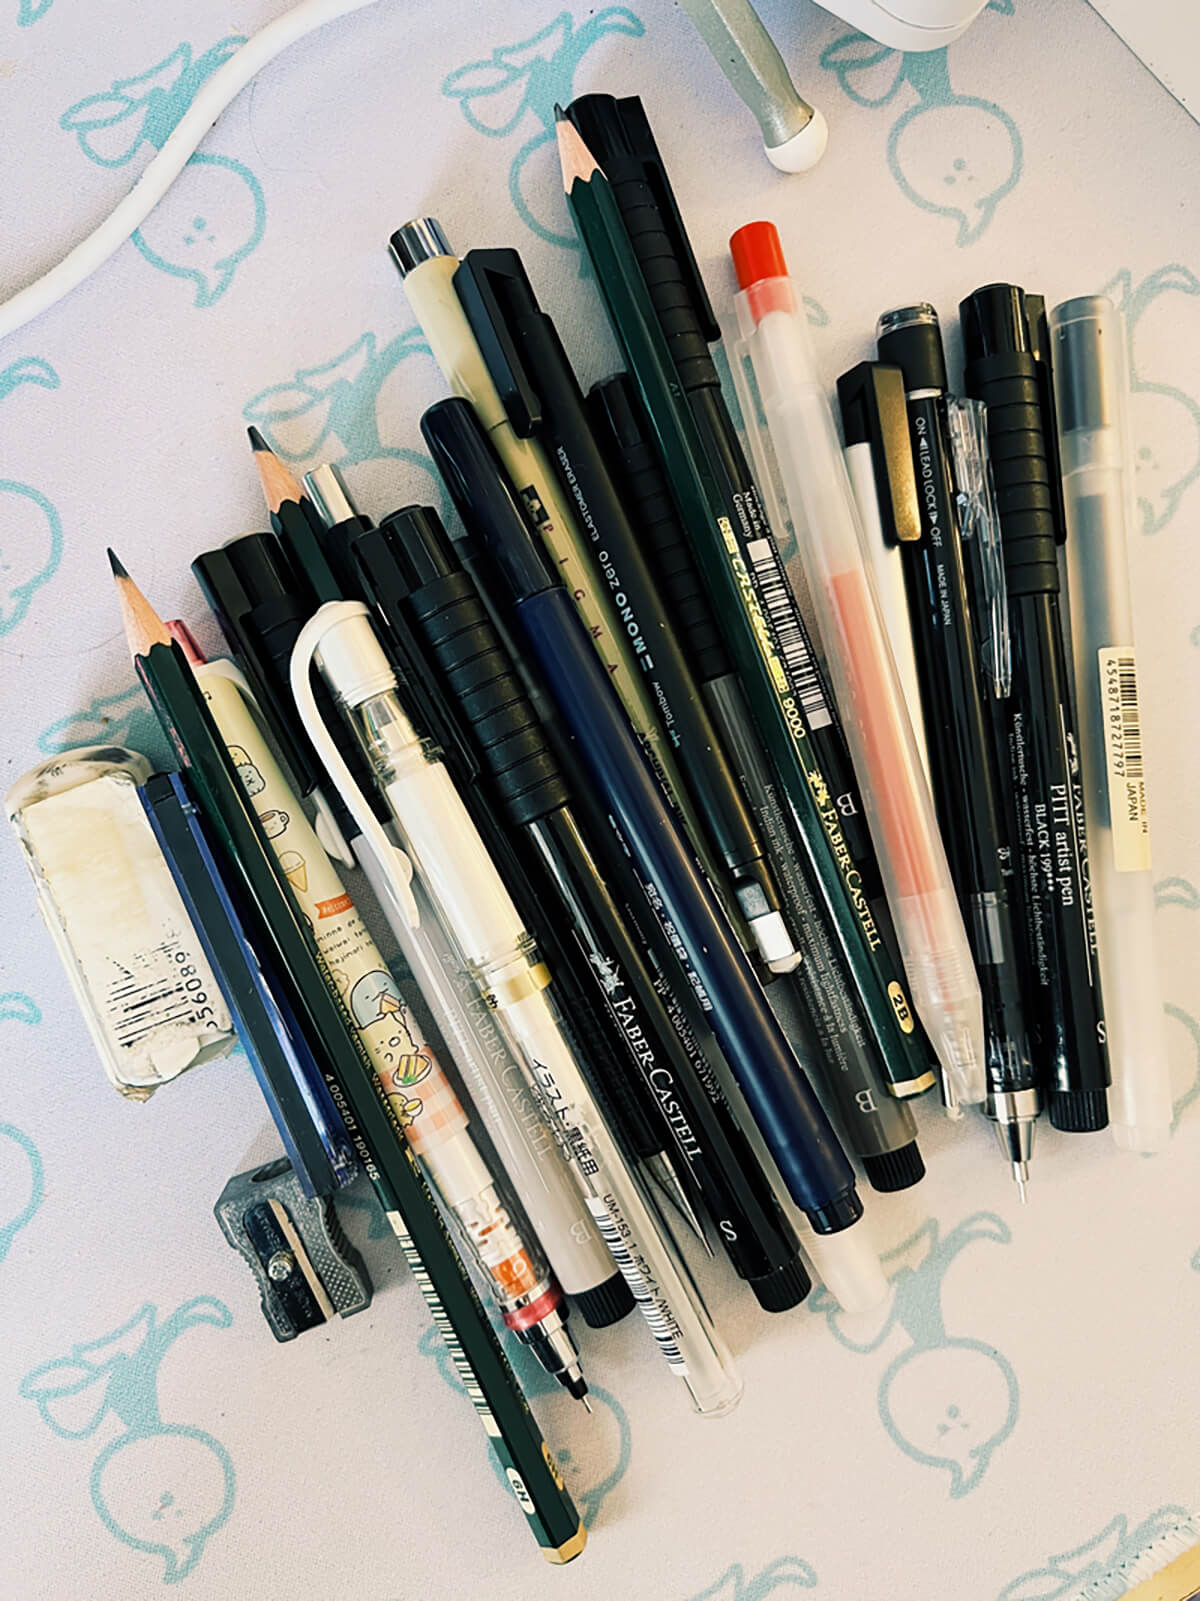 A bunch of pens for drawing.